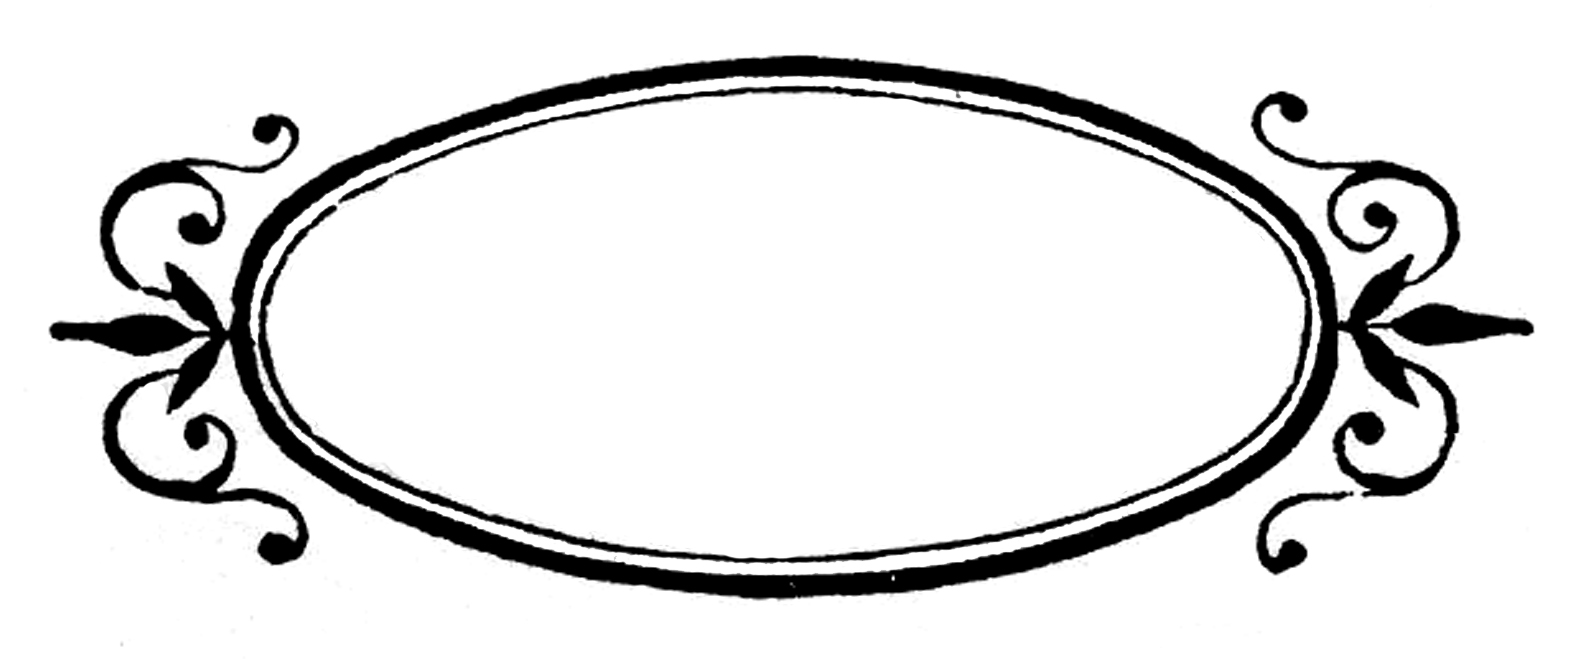 Free Oval Frame Cliparts, Download Free Clip Art, Free Clip.